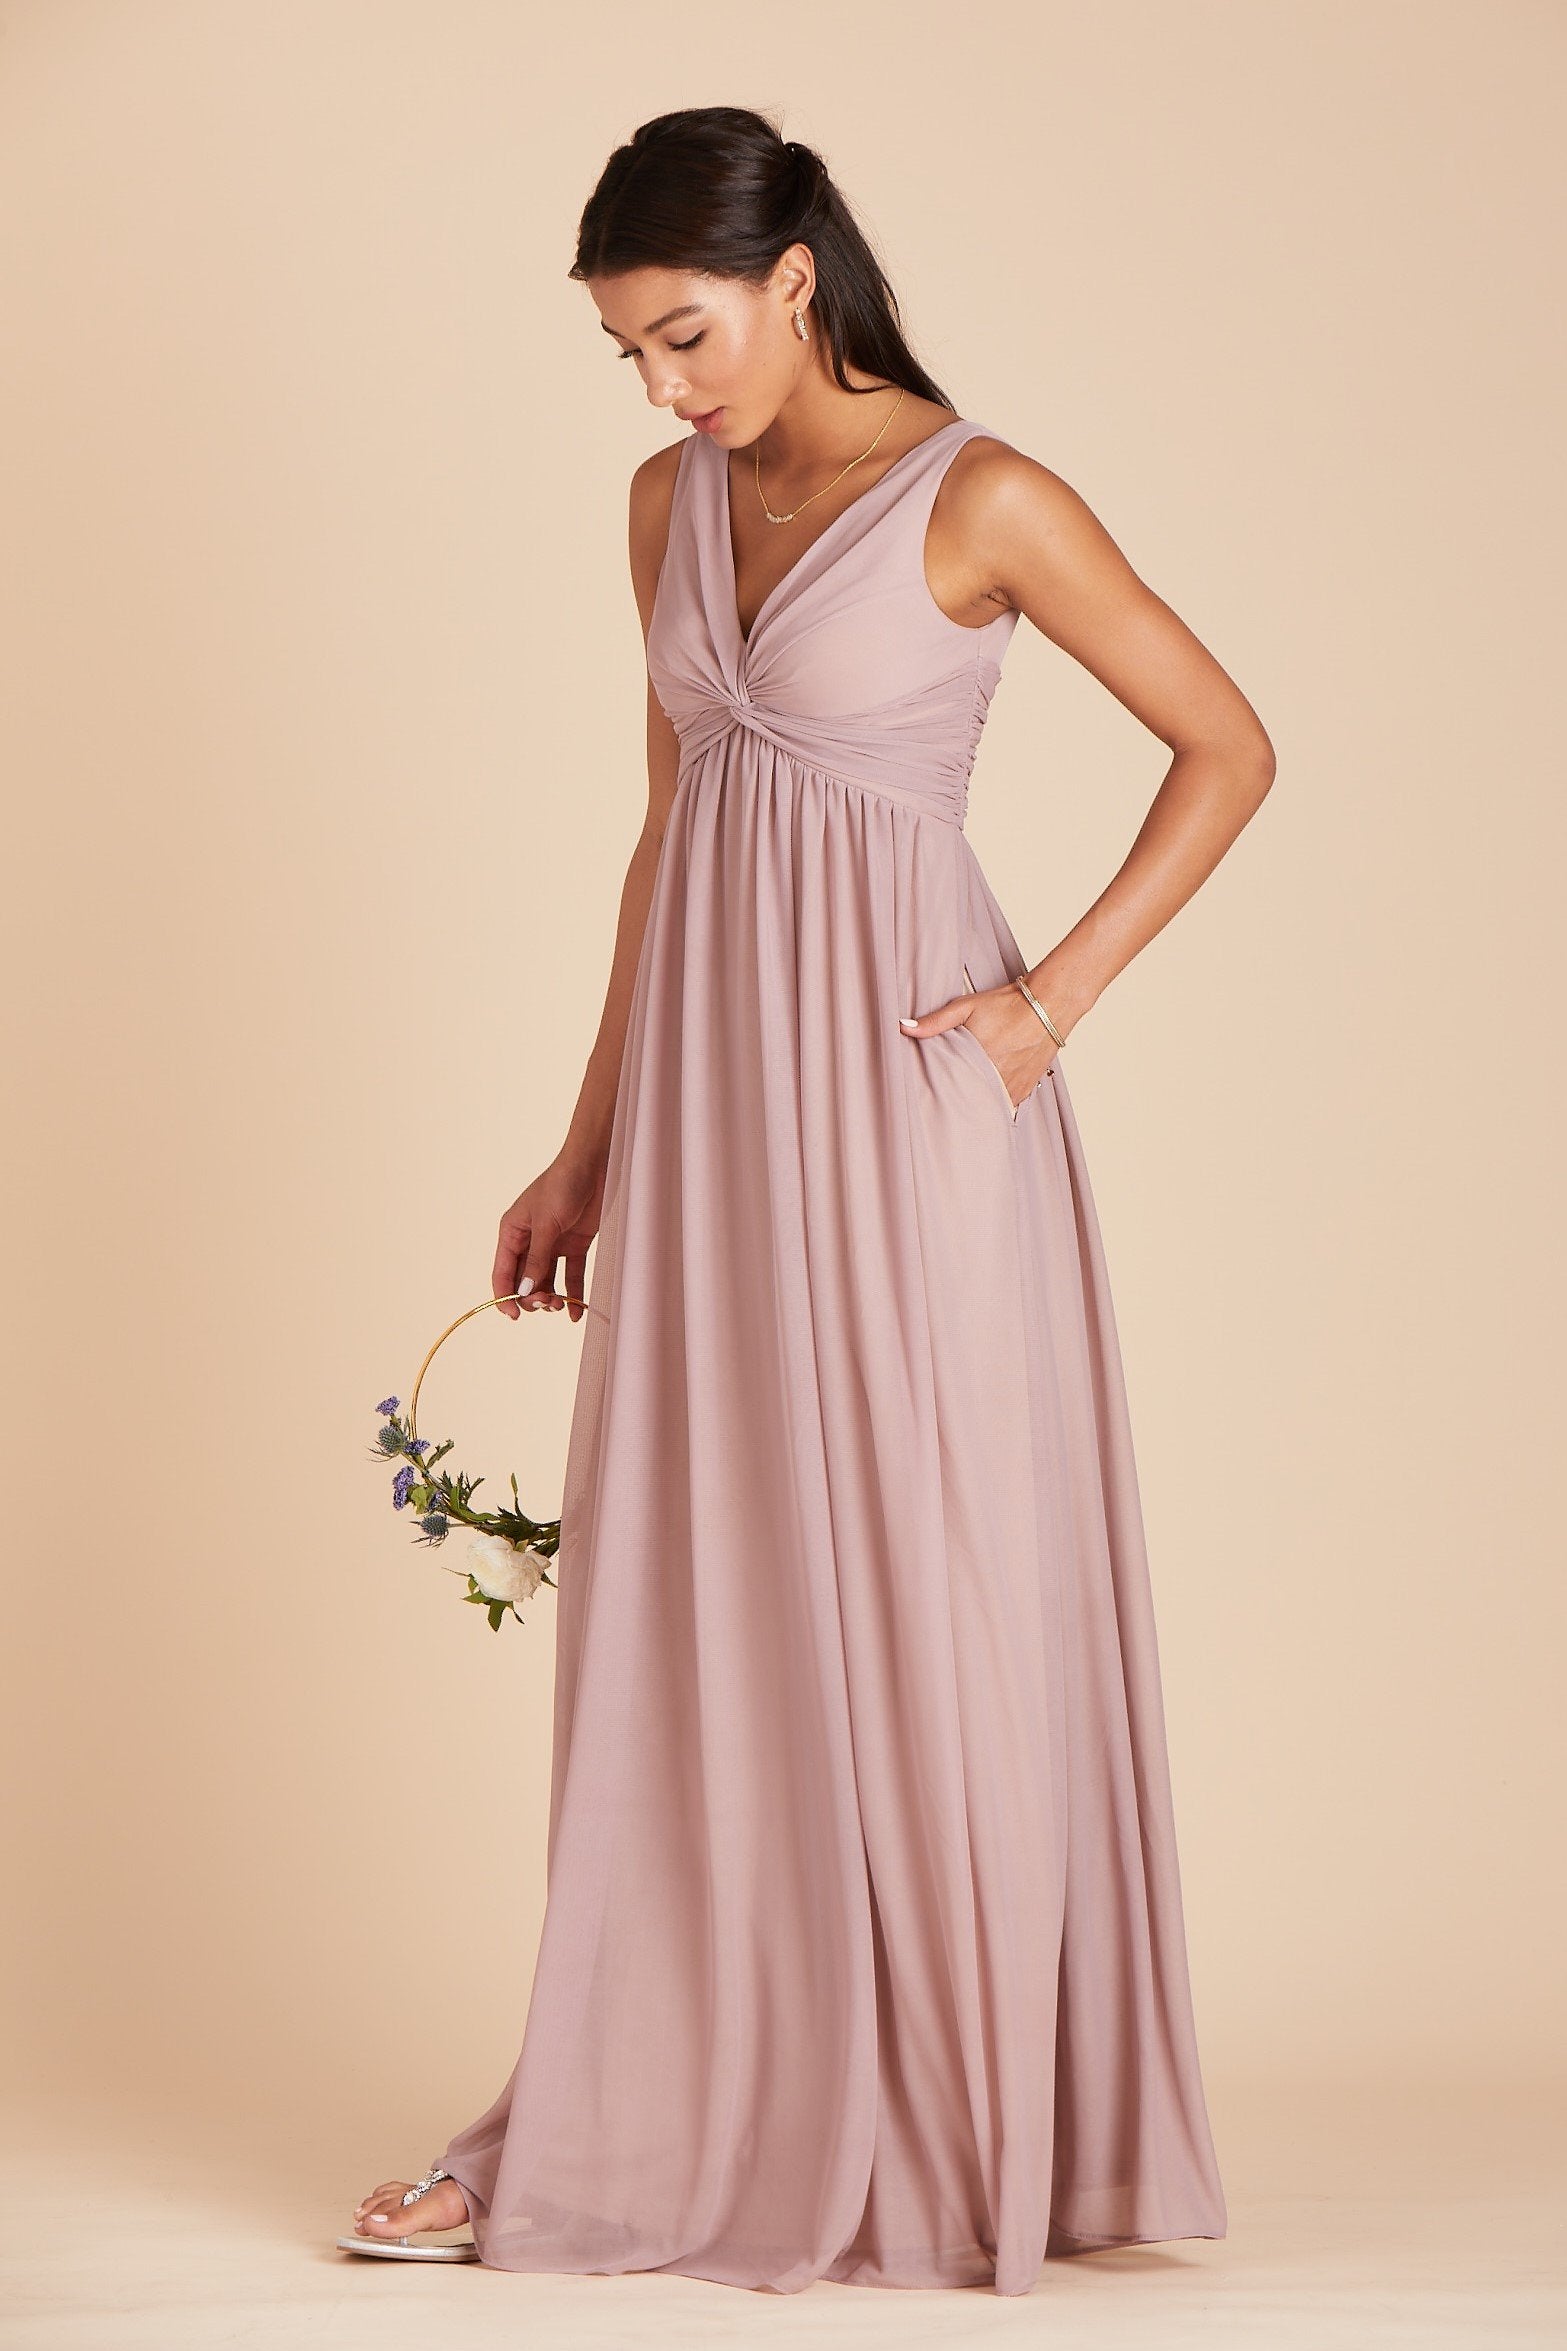 Lianna bridesmaid dress in mauve pink chiffon by Birdy Grey, front view with hand in pocket